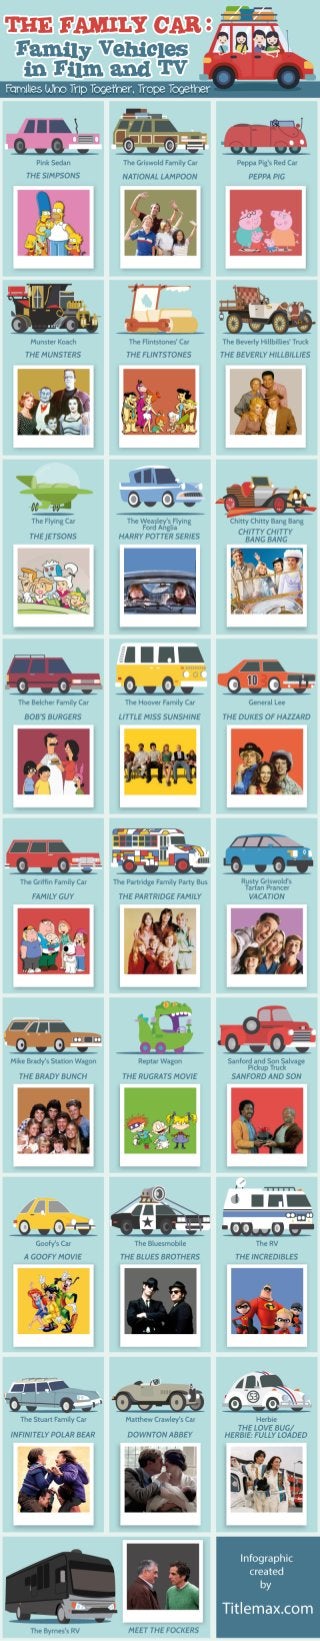 The Family Car: Family Vehicles in Film and TV